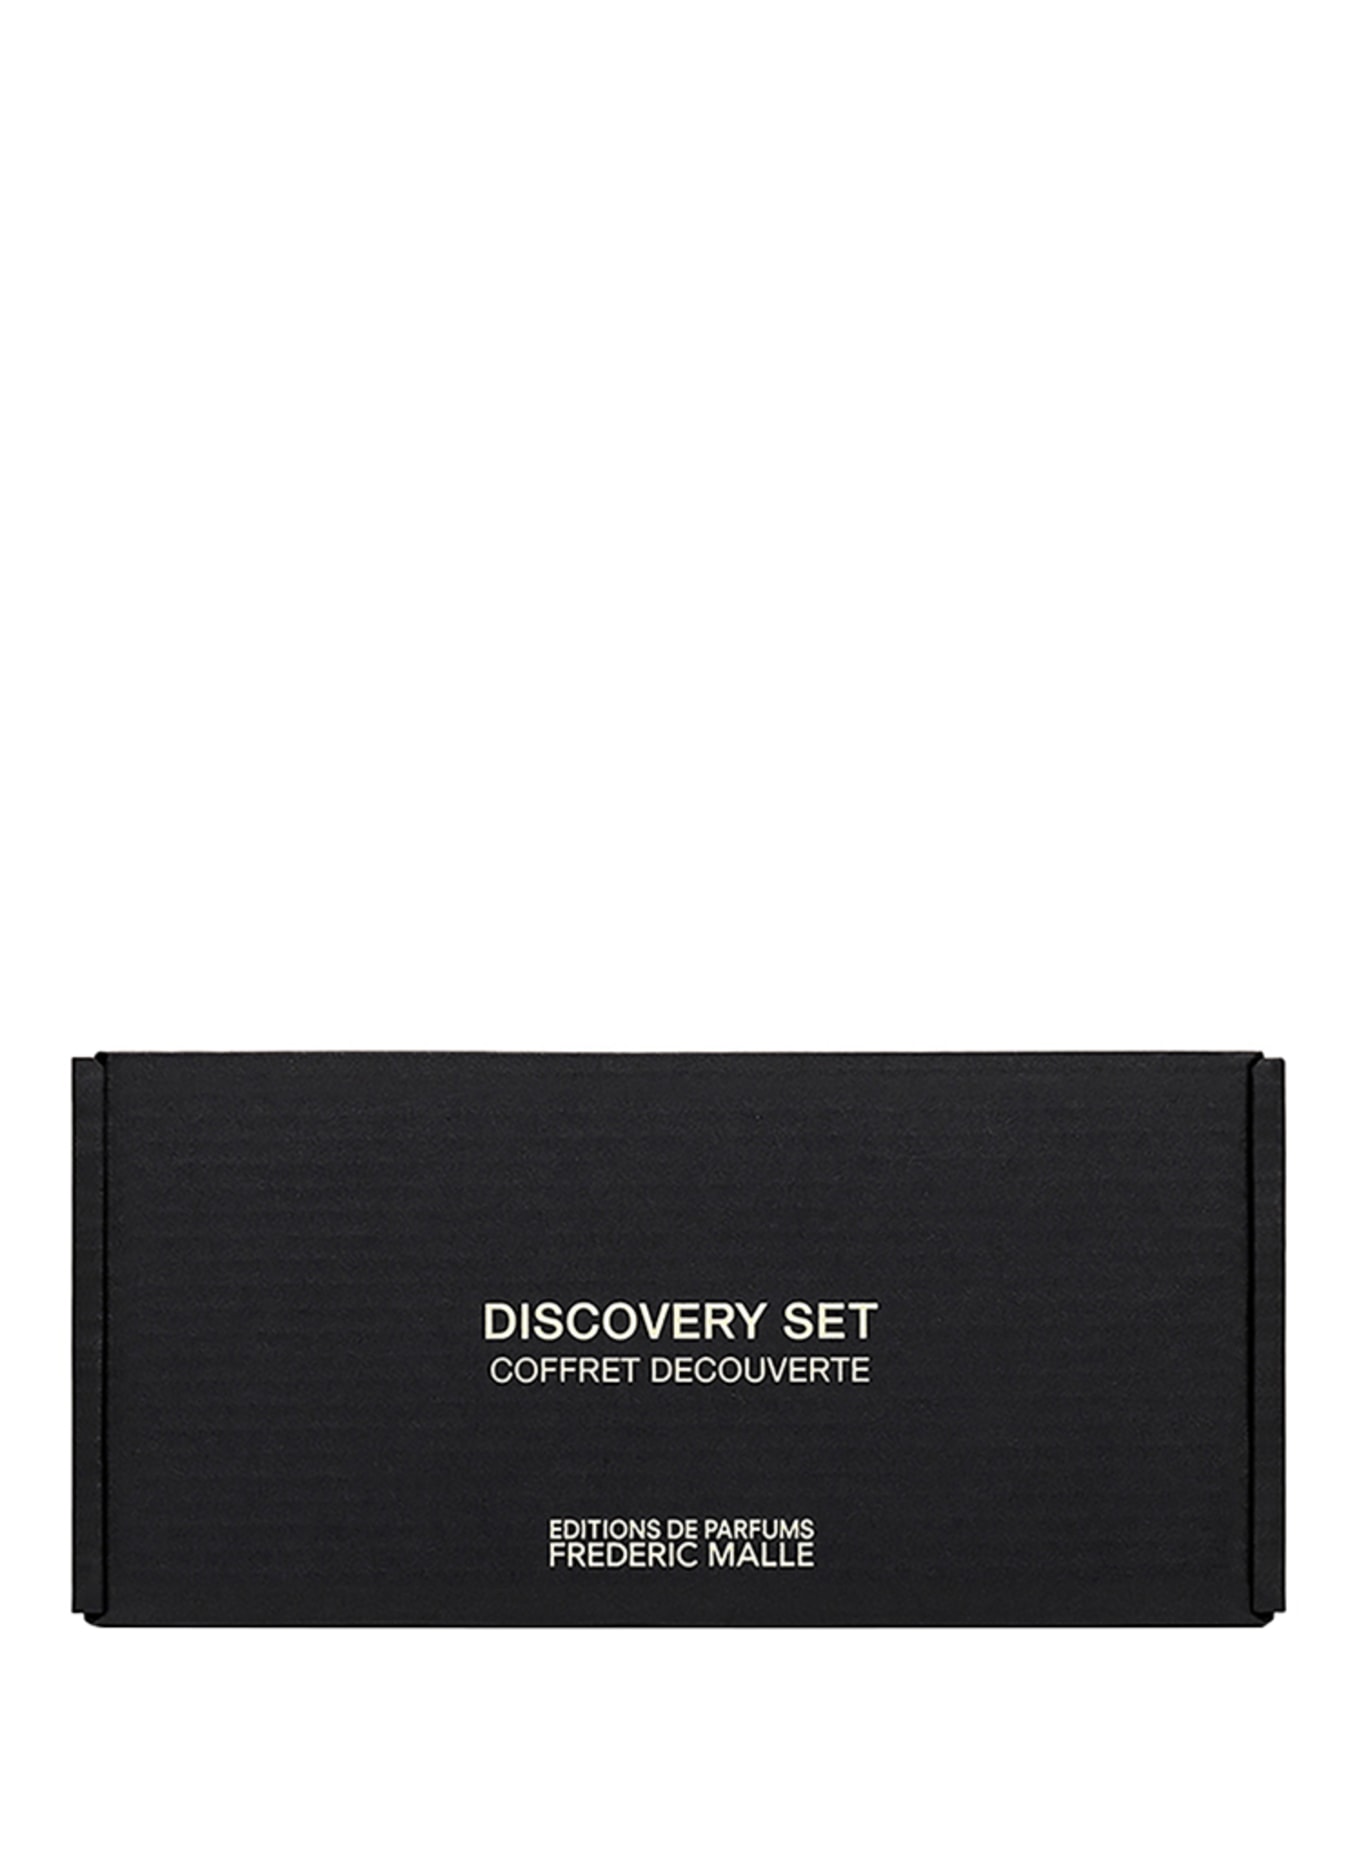 EDITIONS DE PARFUMS FREDERIC MALLE DISCOVERY SET - FOR HER (Bild 2)